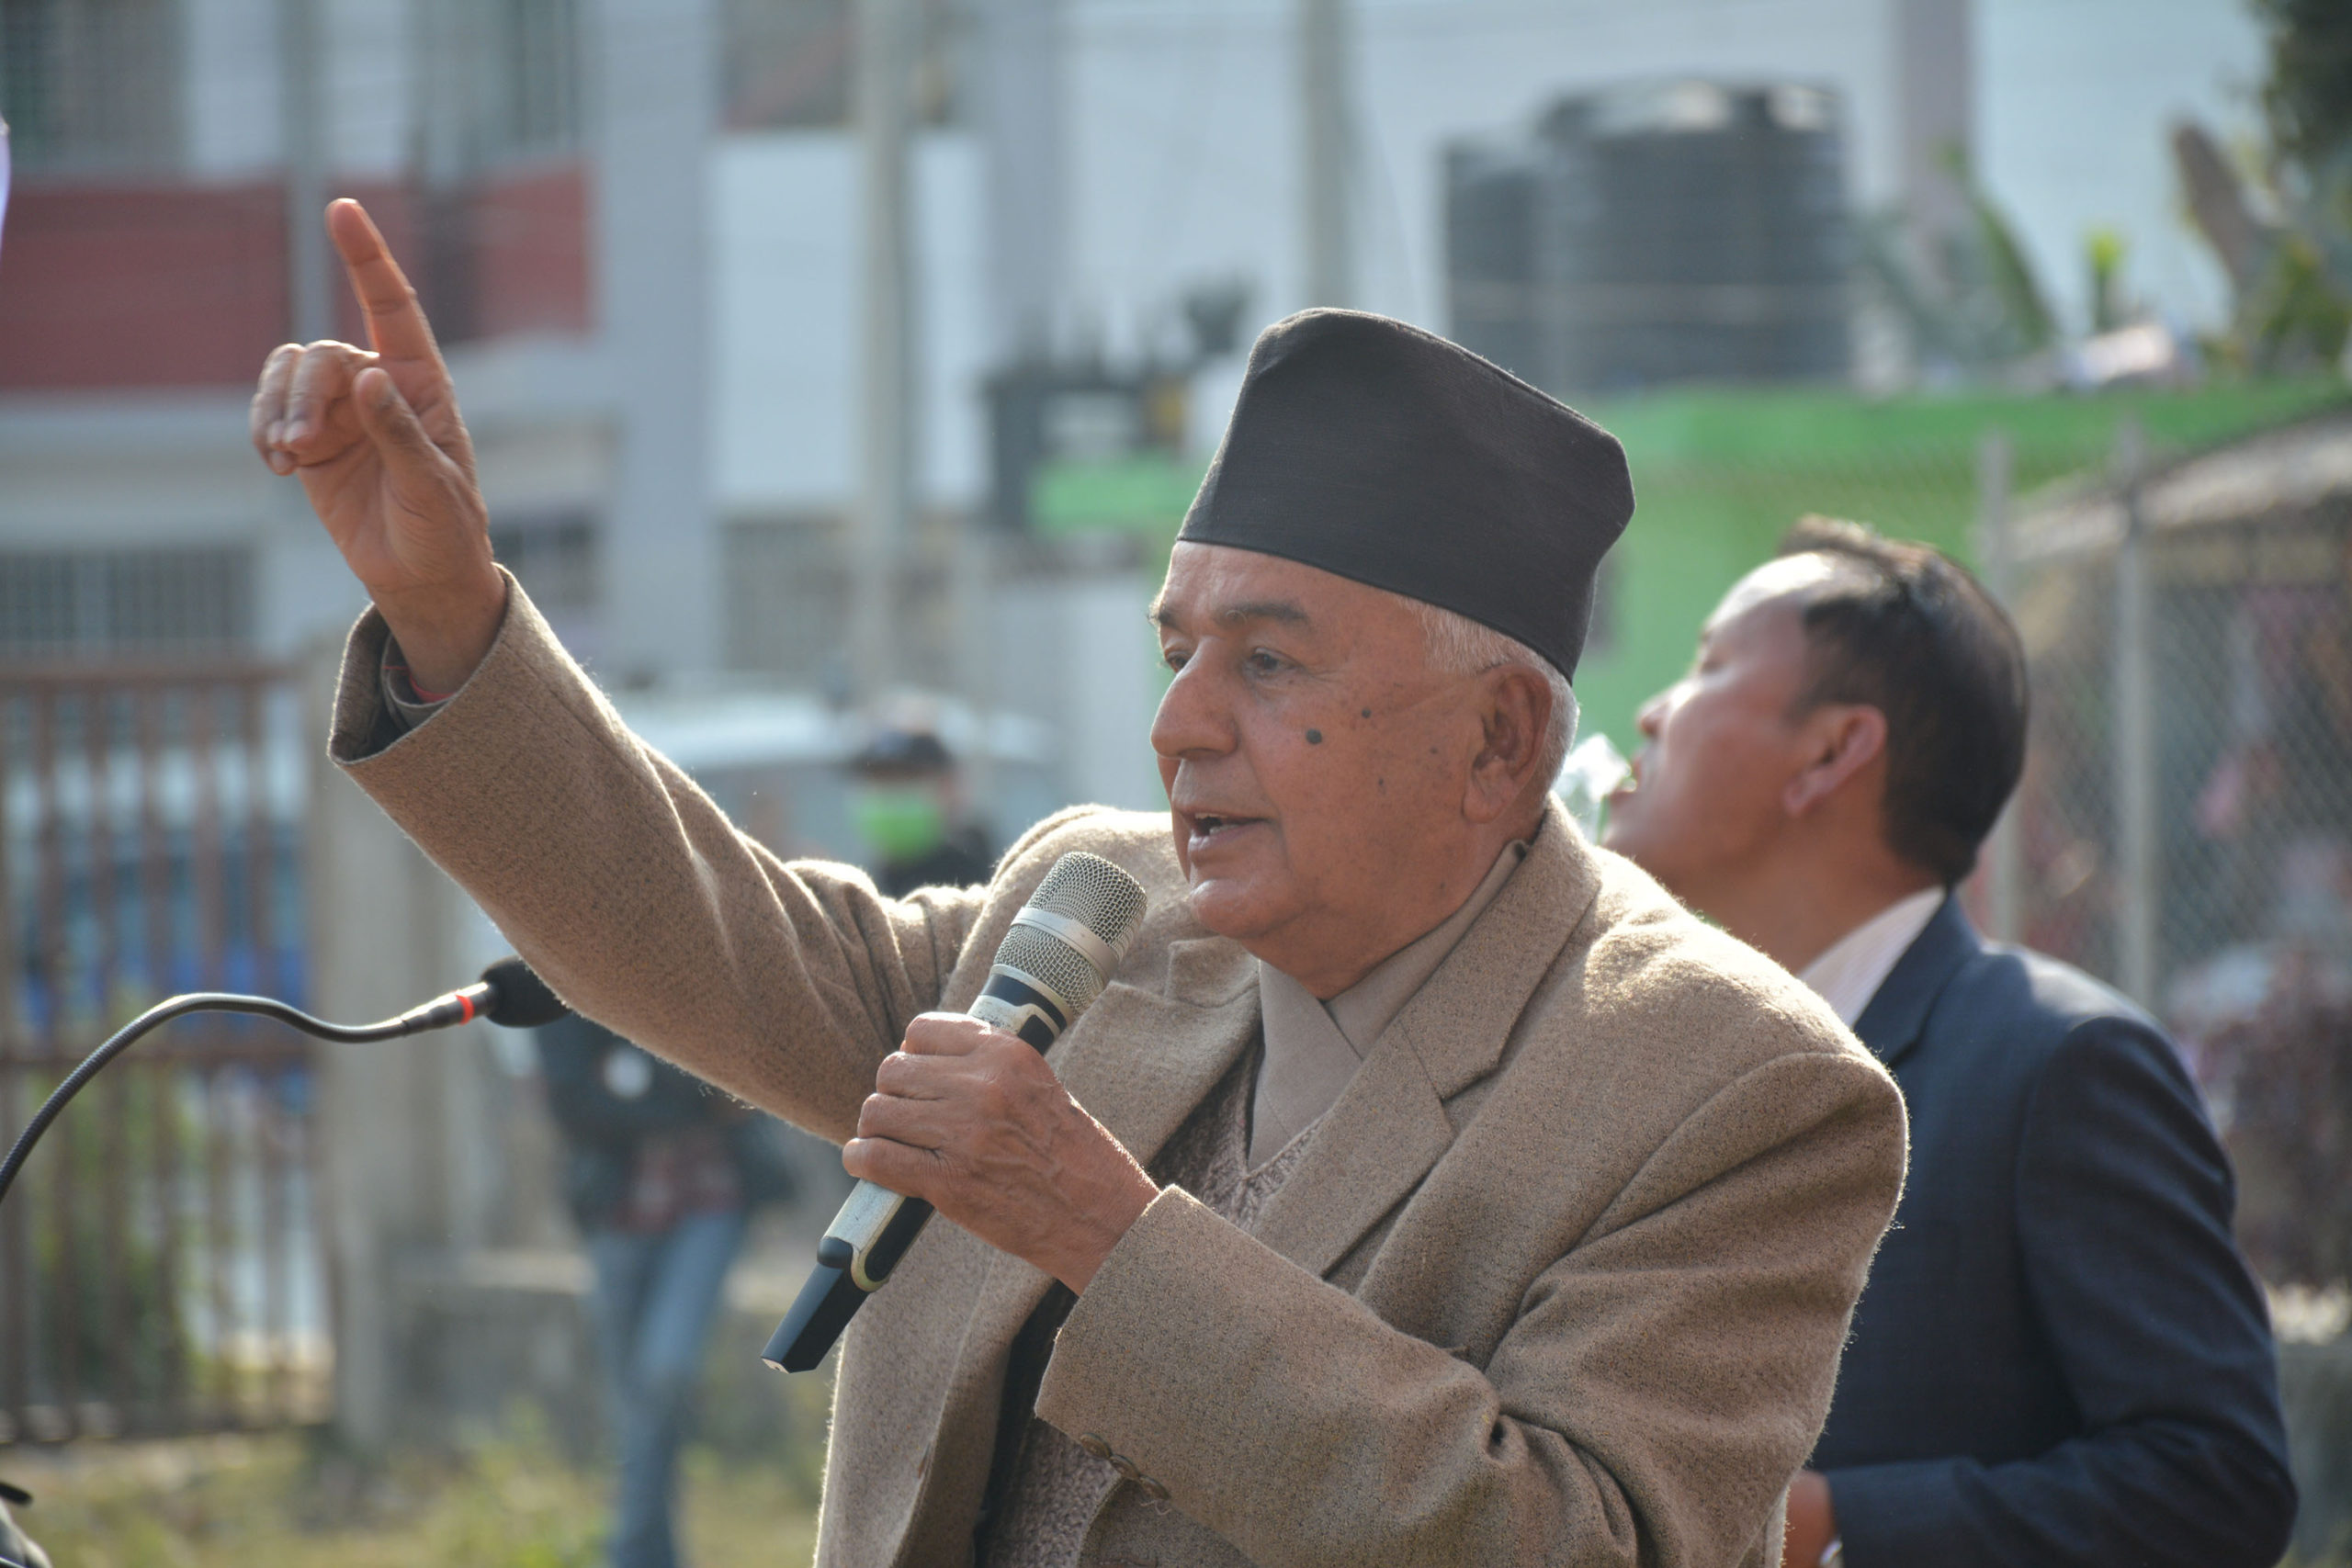 NC senior leader Poudel alleges Prachanda and Madhav Nepal for spreading confusion on MCC